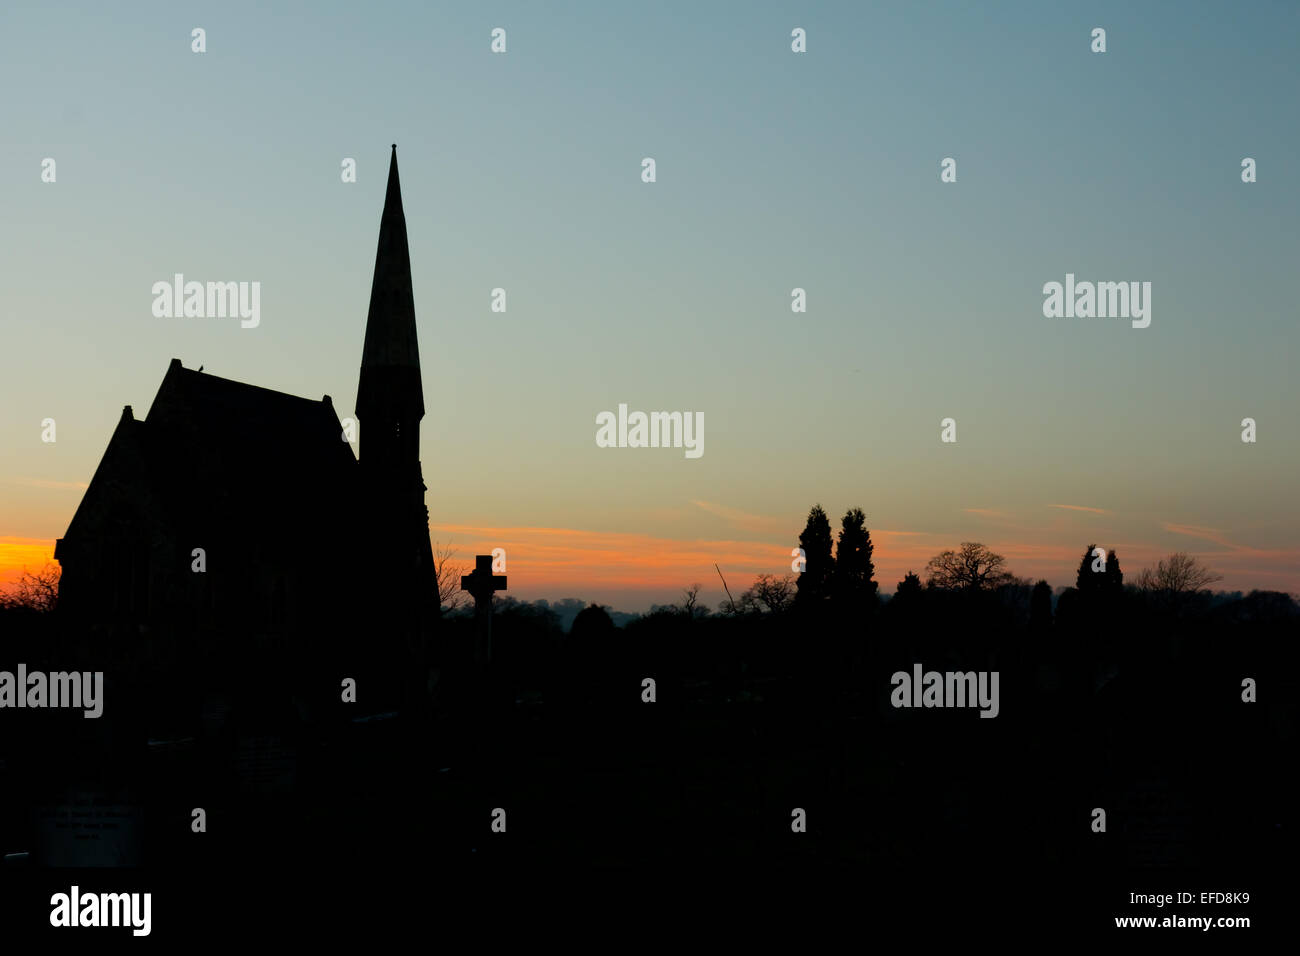 Silhouette of a church and grave yard at sunset Stock Photo